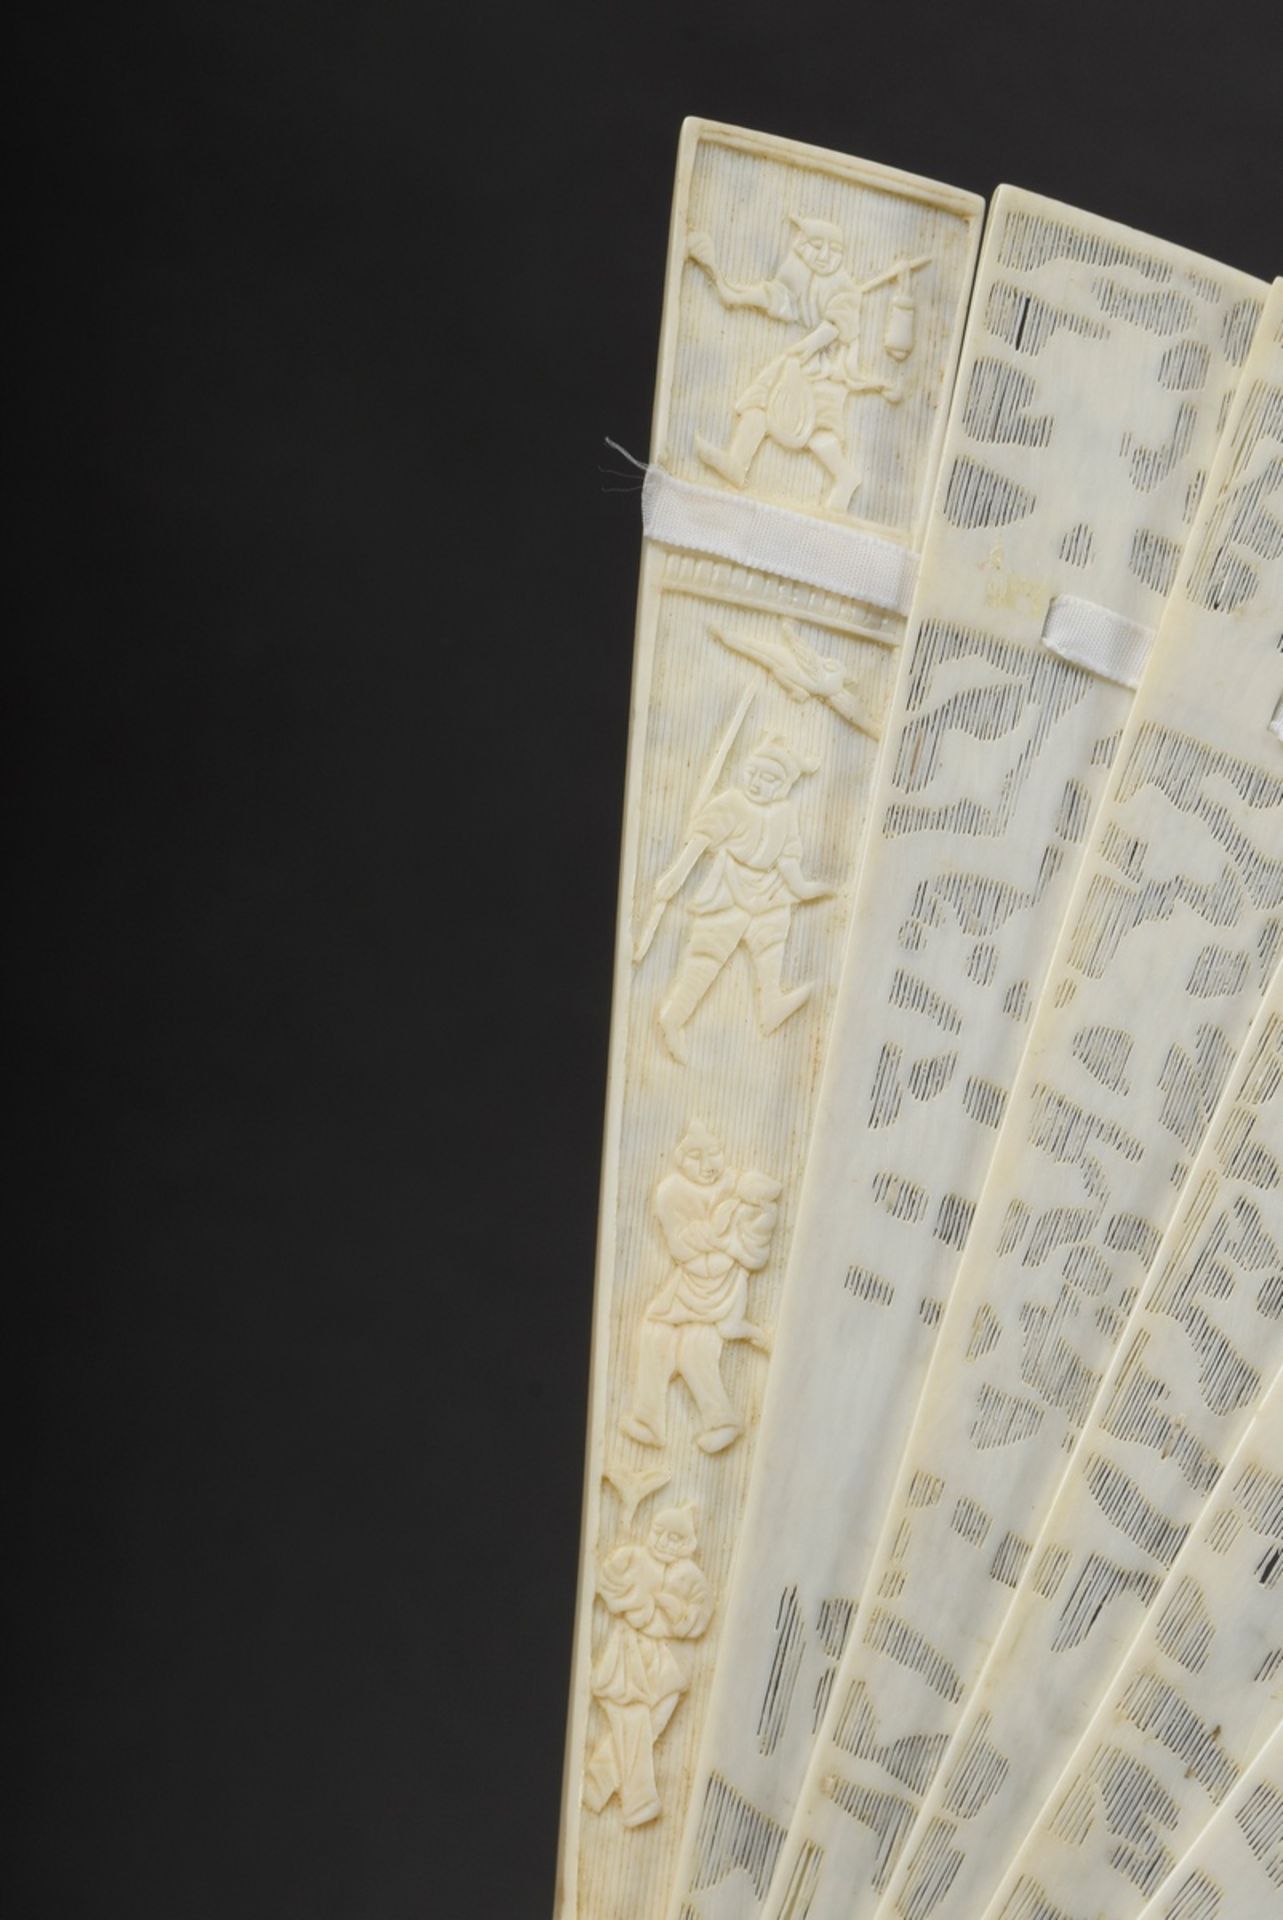 Ivory brisée fan with finest carvings "Chinese genre scenes" and central monogram "MB", Canton end  - Image 7 of 8